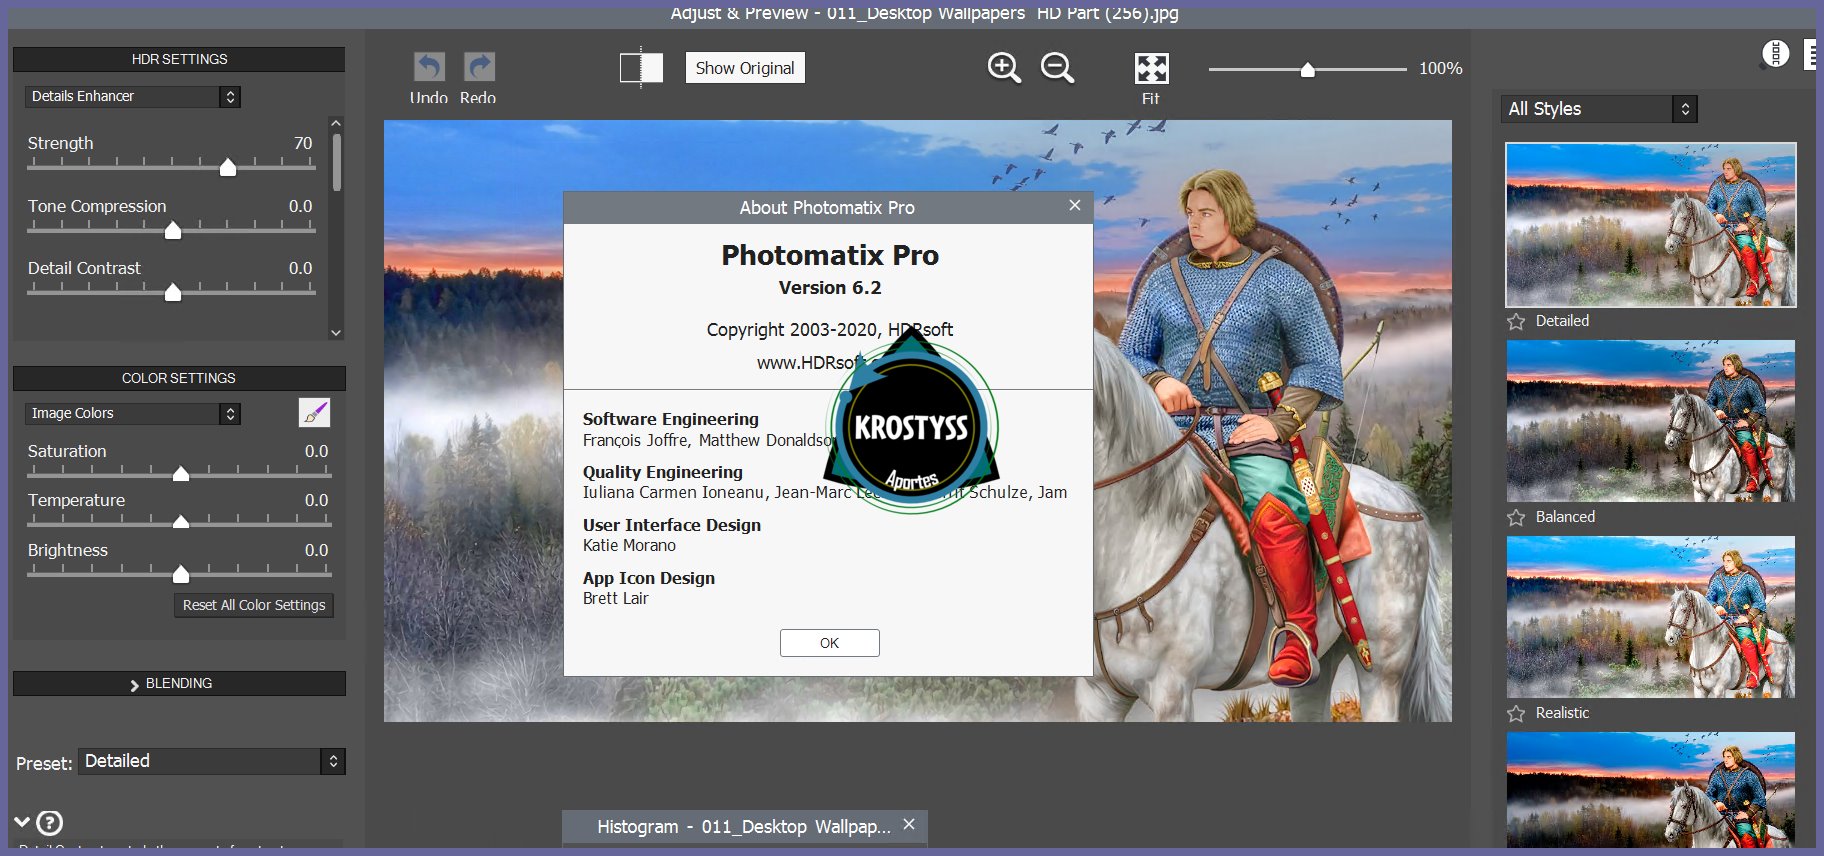 disable automatic updates for photomatix pro on mac os x